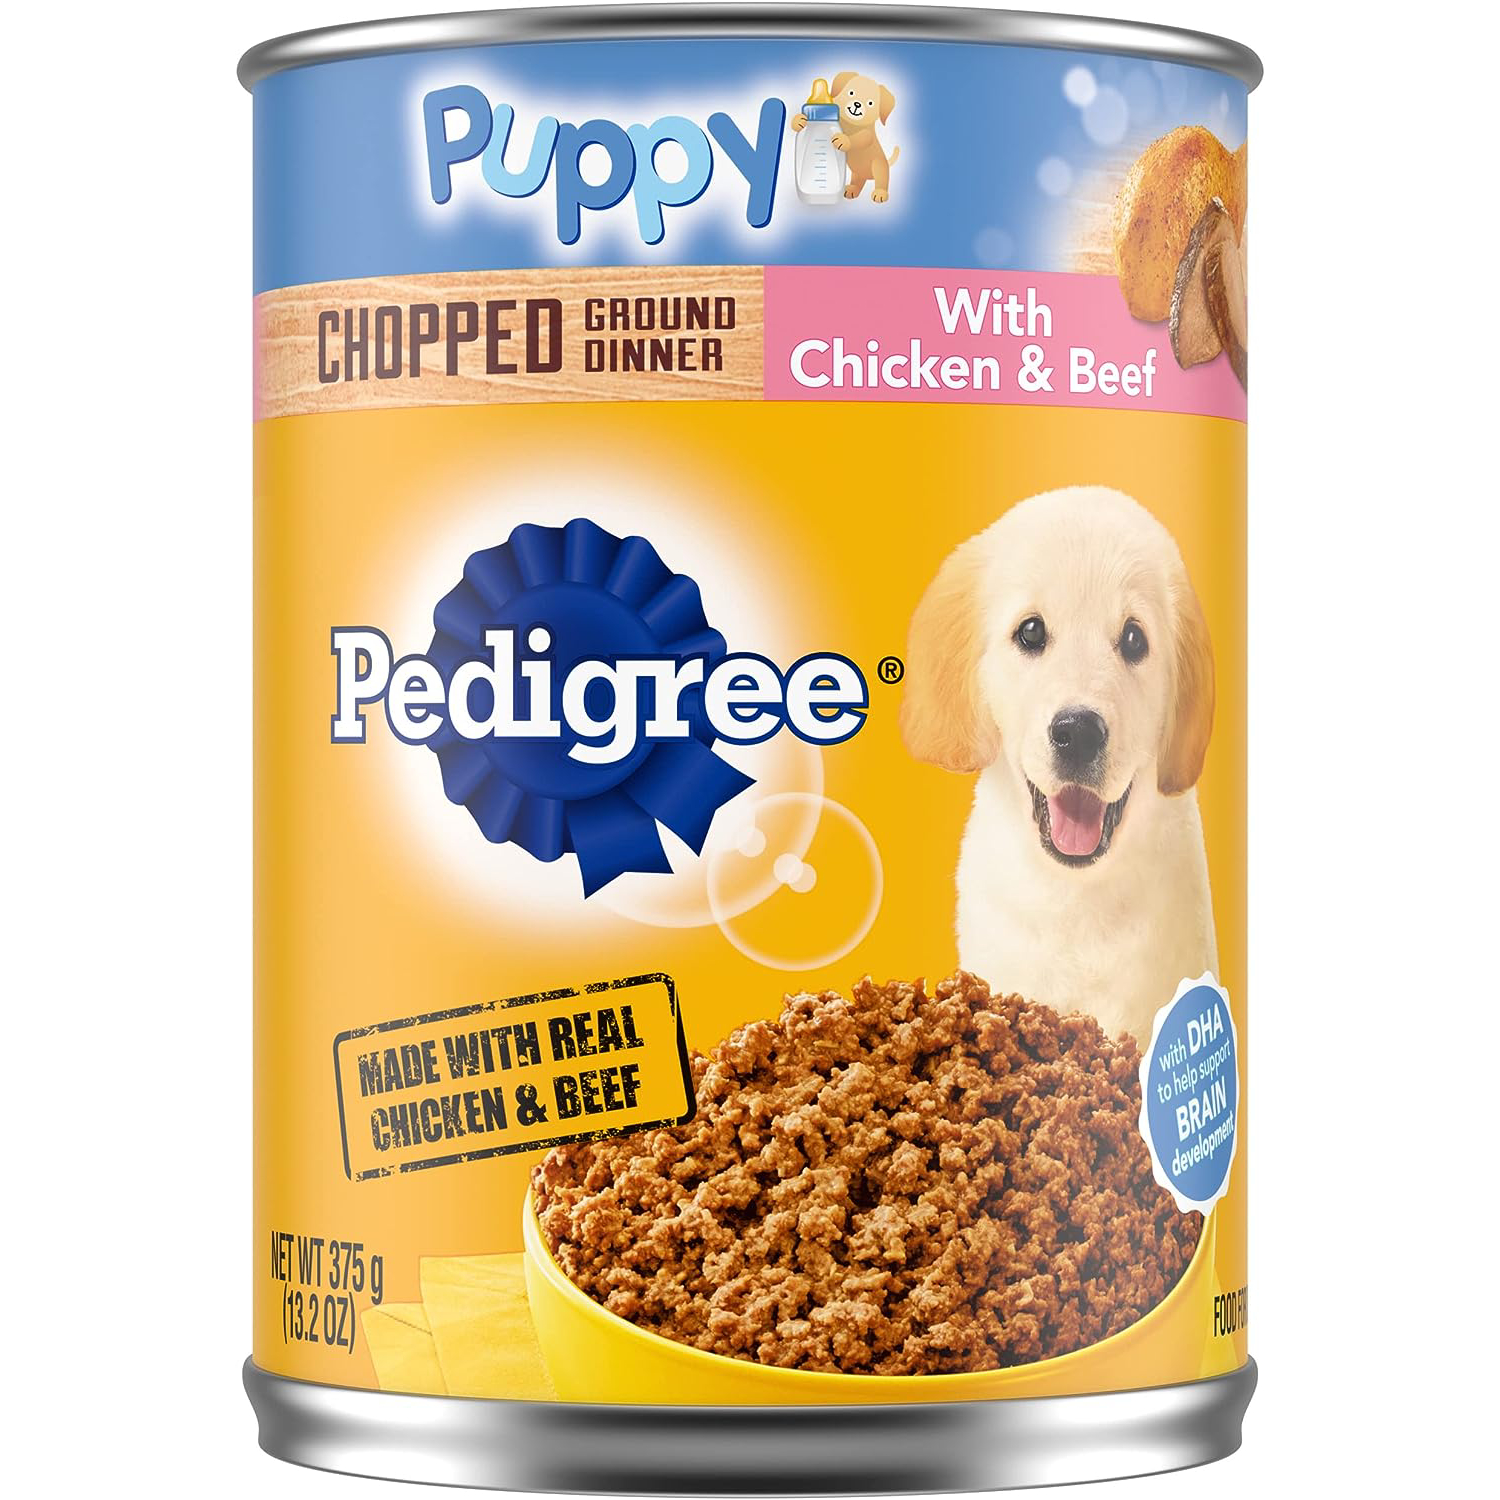 New Project PEDIGREE CHOPPED GROUND DINNER Puppy Canned Soft Wet Dog Food 